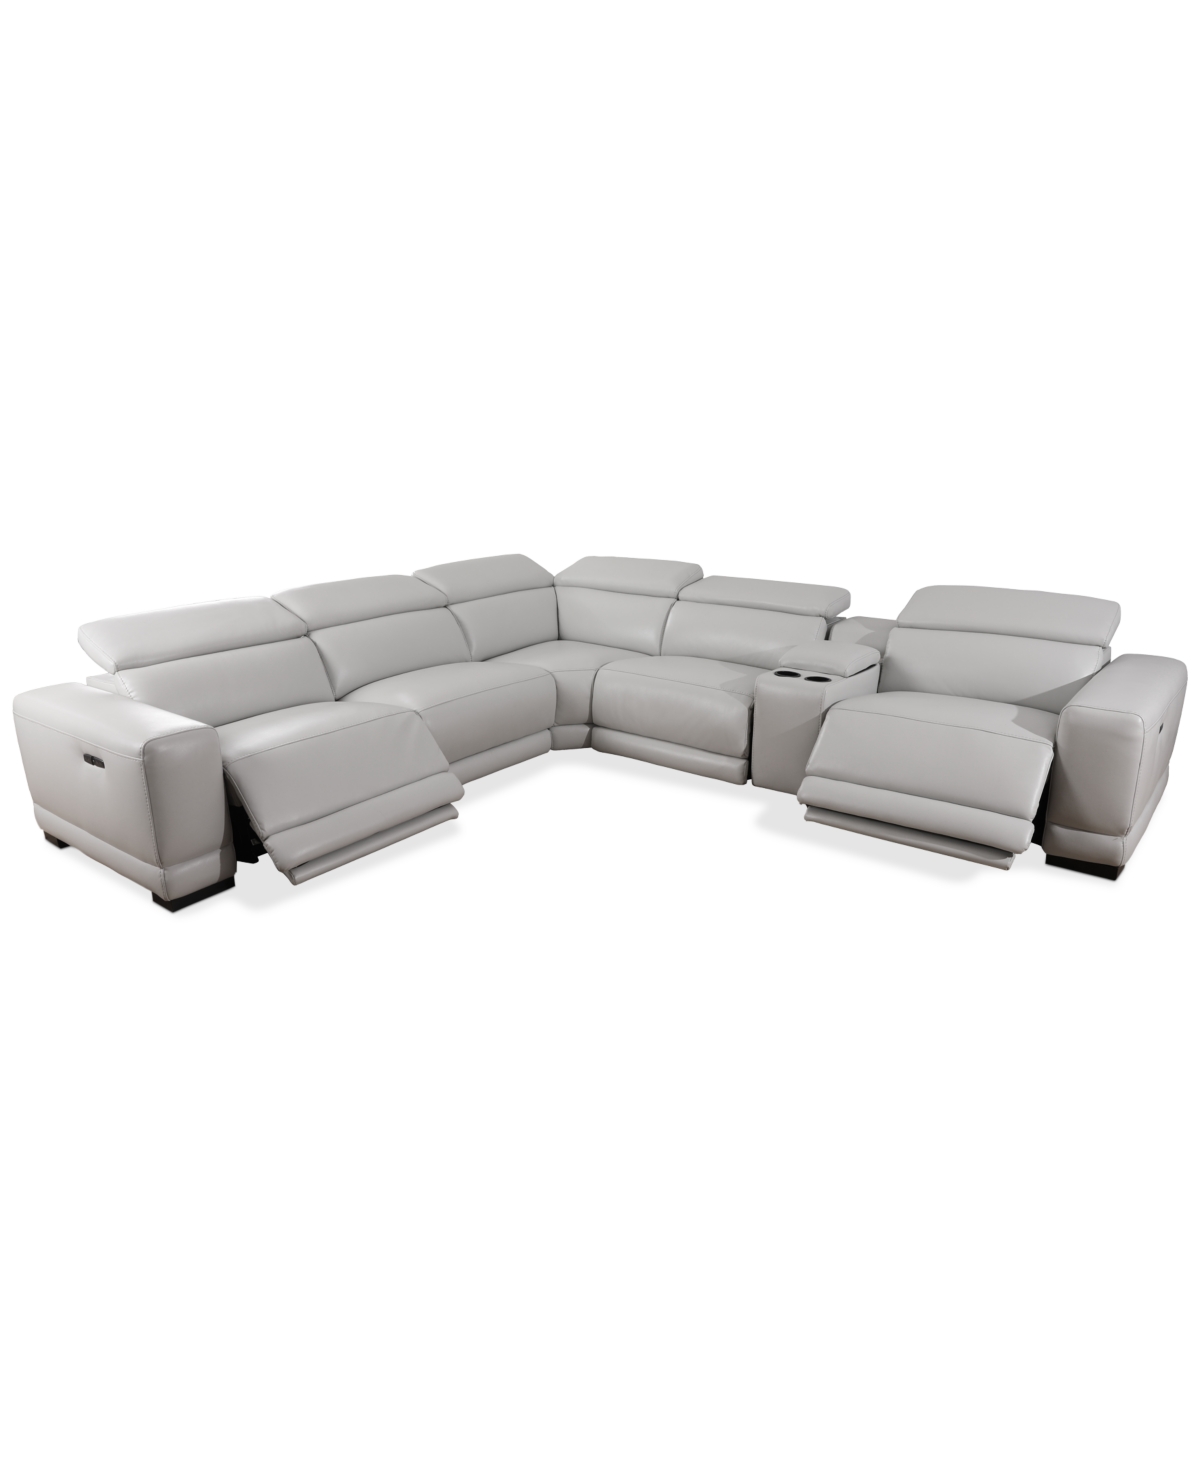 Furniture Krofton 6-pc. Beyond Leather Fabric Sectional With 2 Power Motion Recliners And 1 Console, Created F In Fog